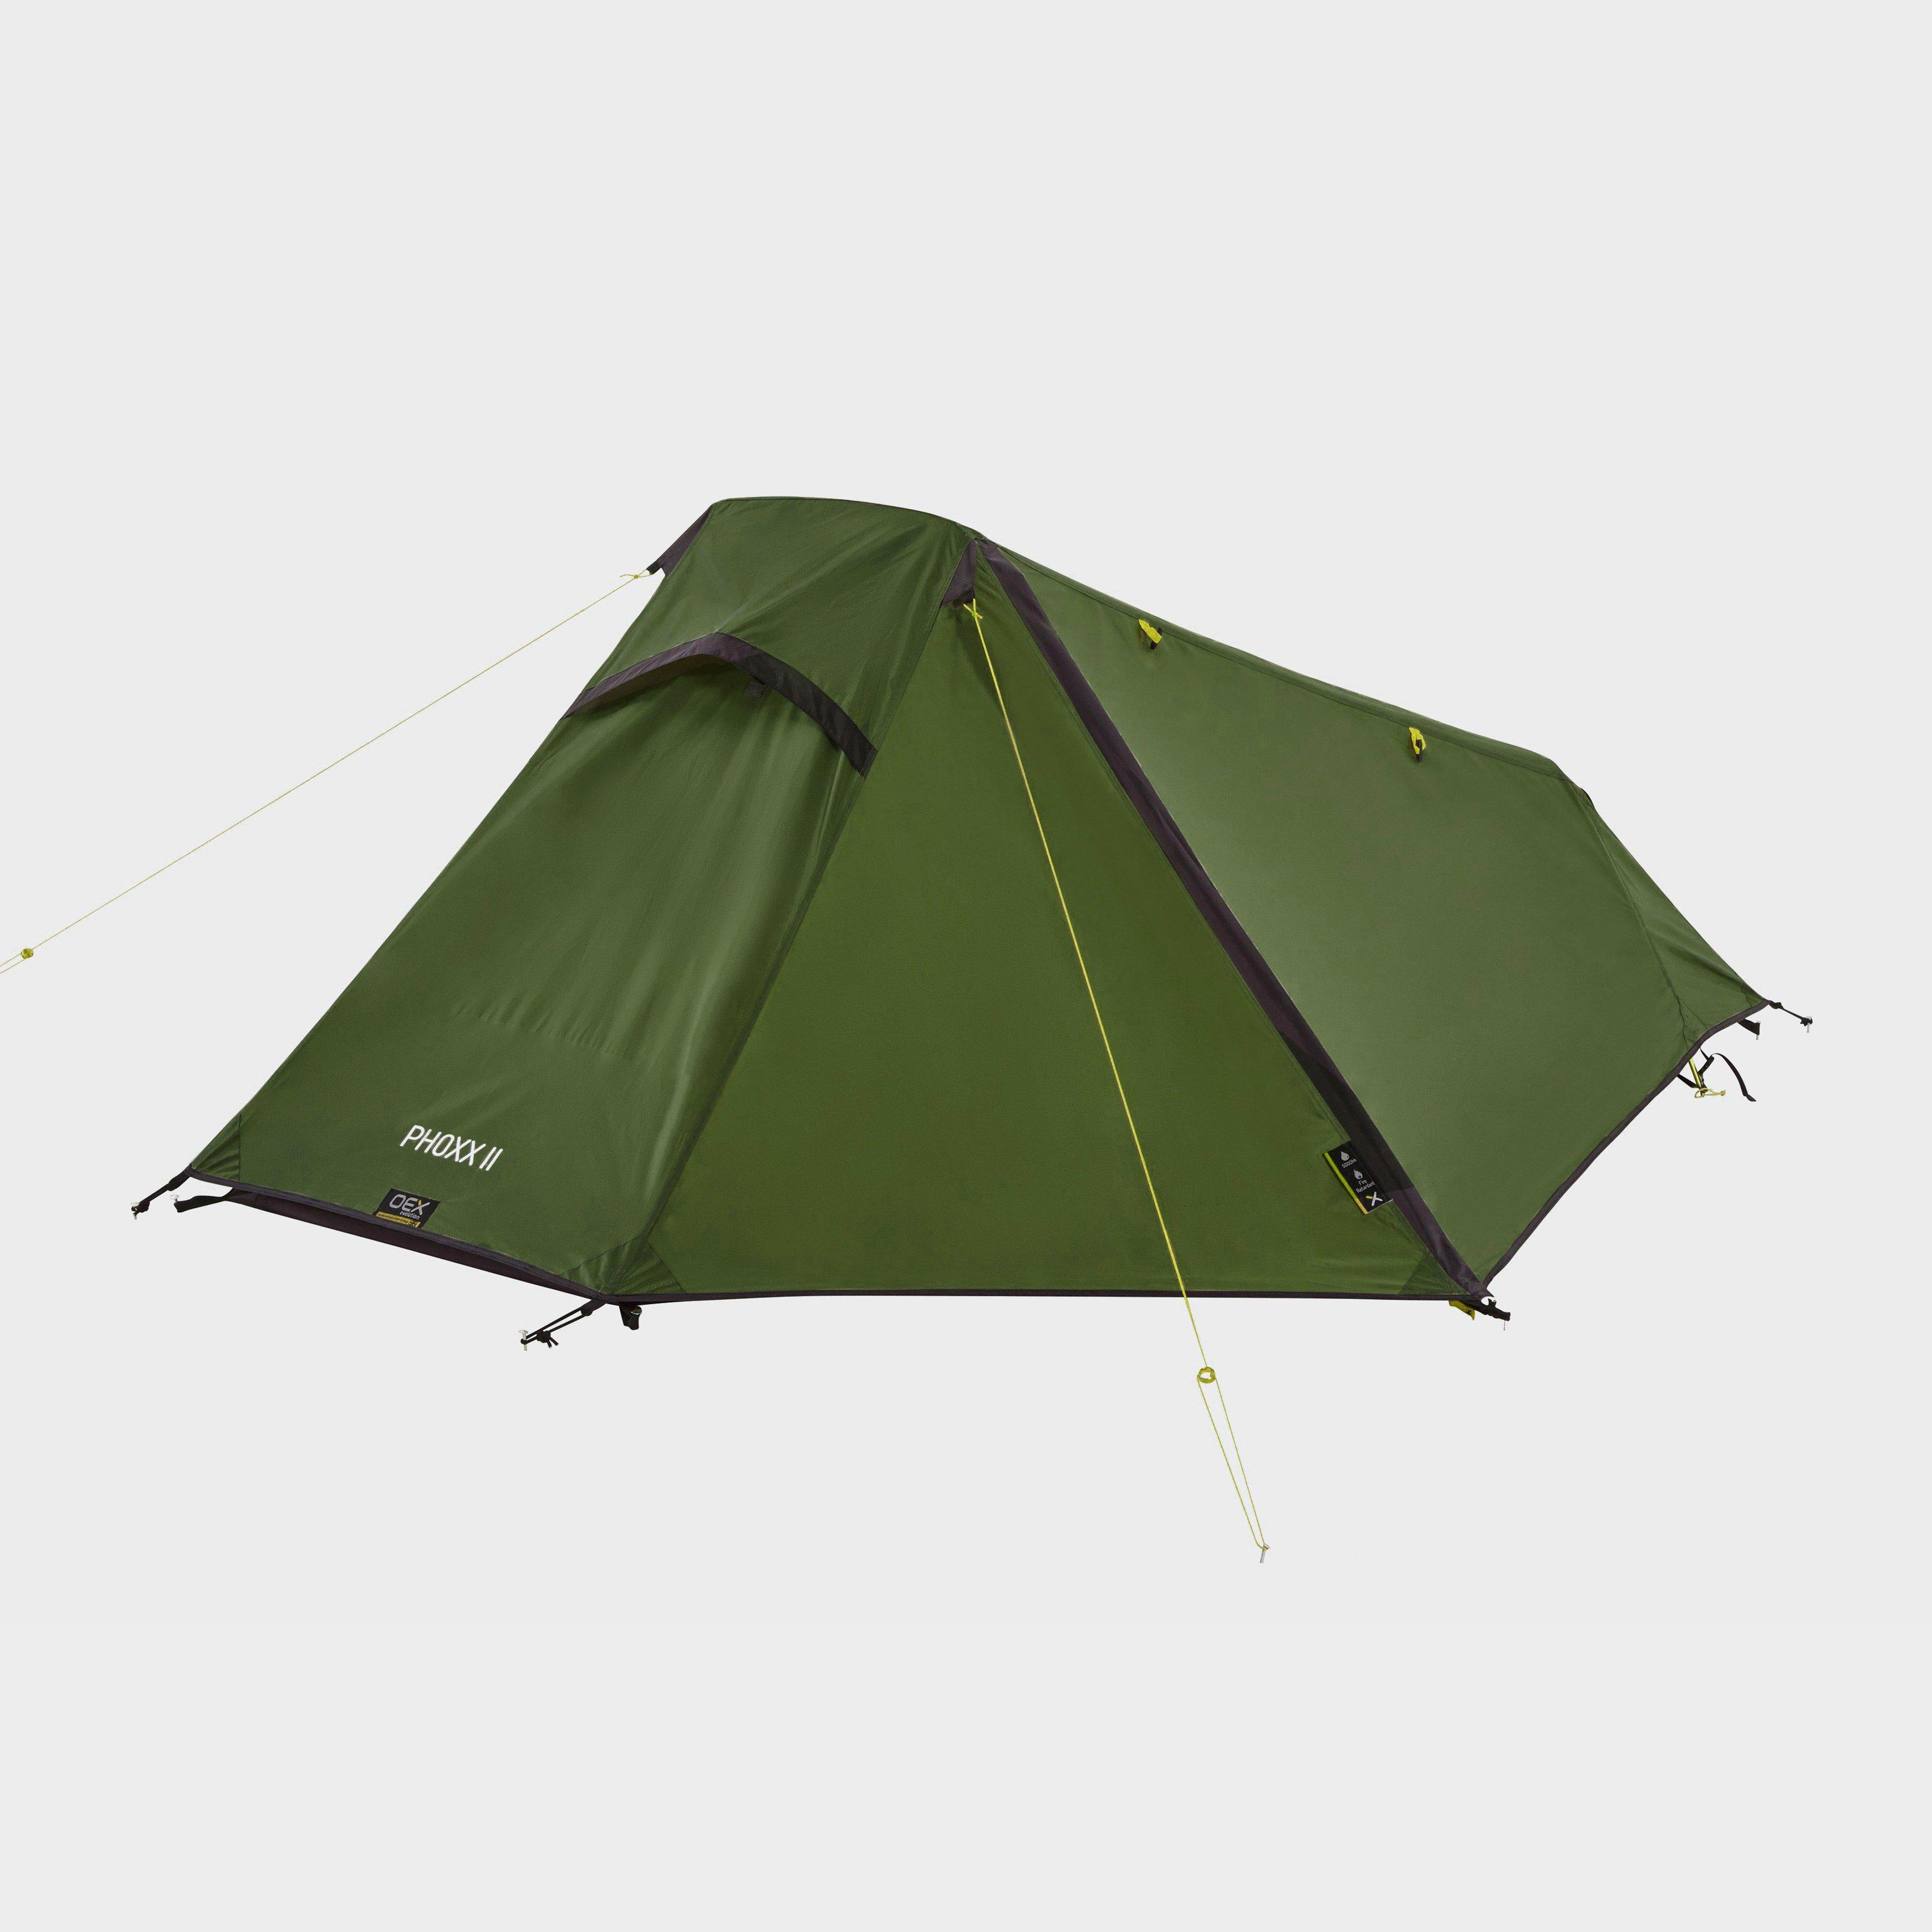 OEX Phoxx 1 Man Backpacking Tent